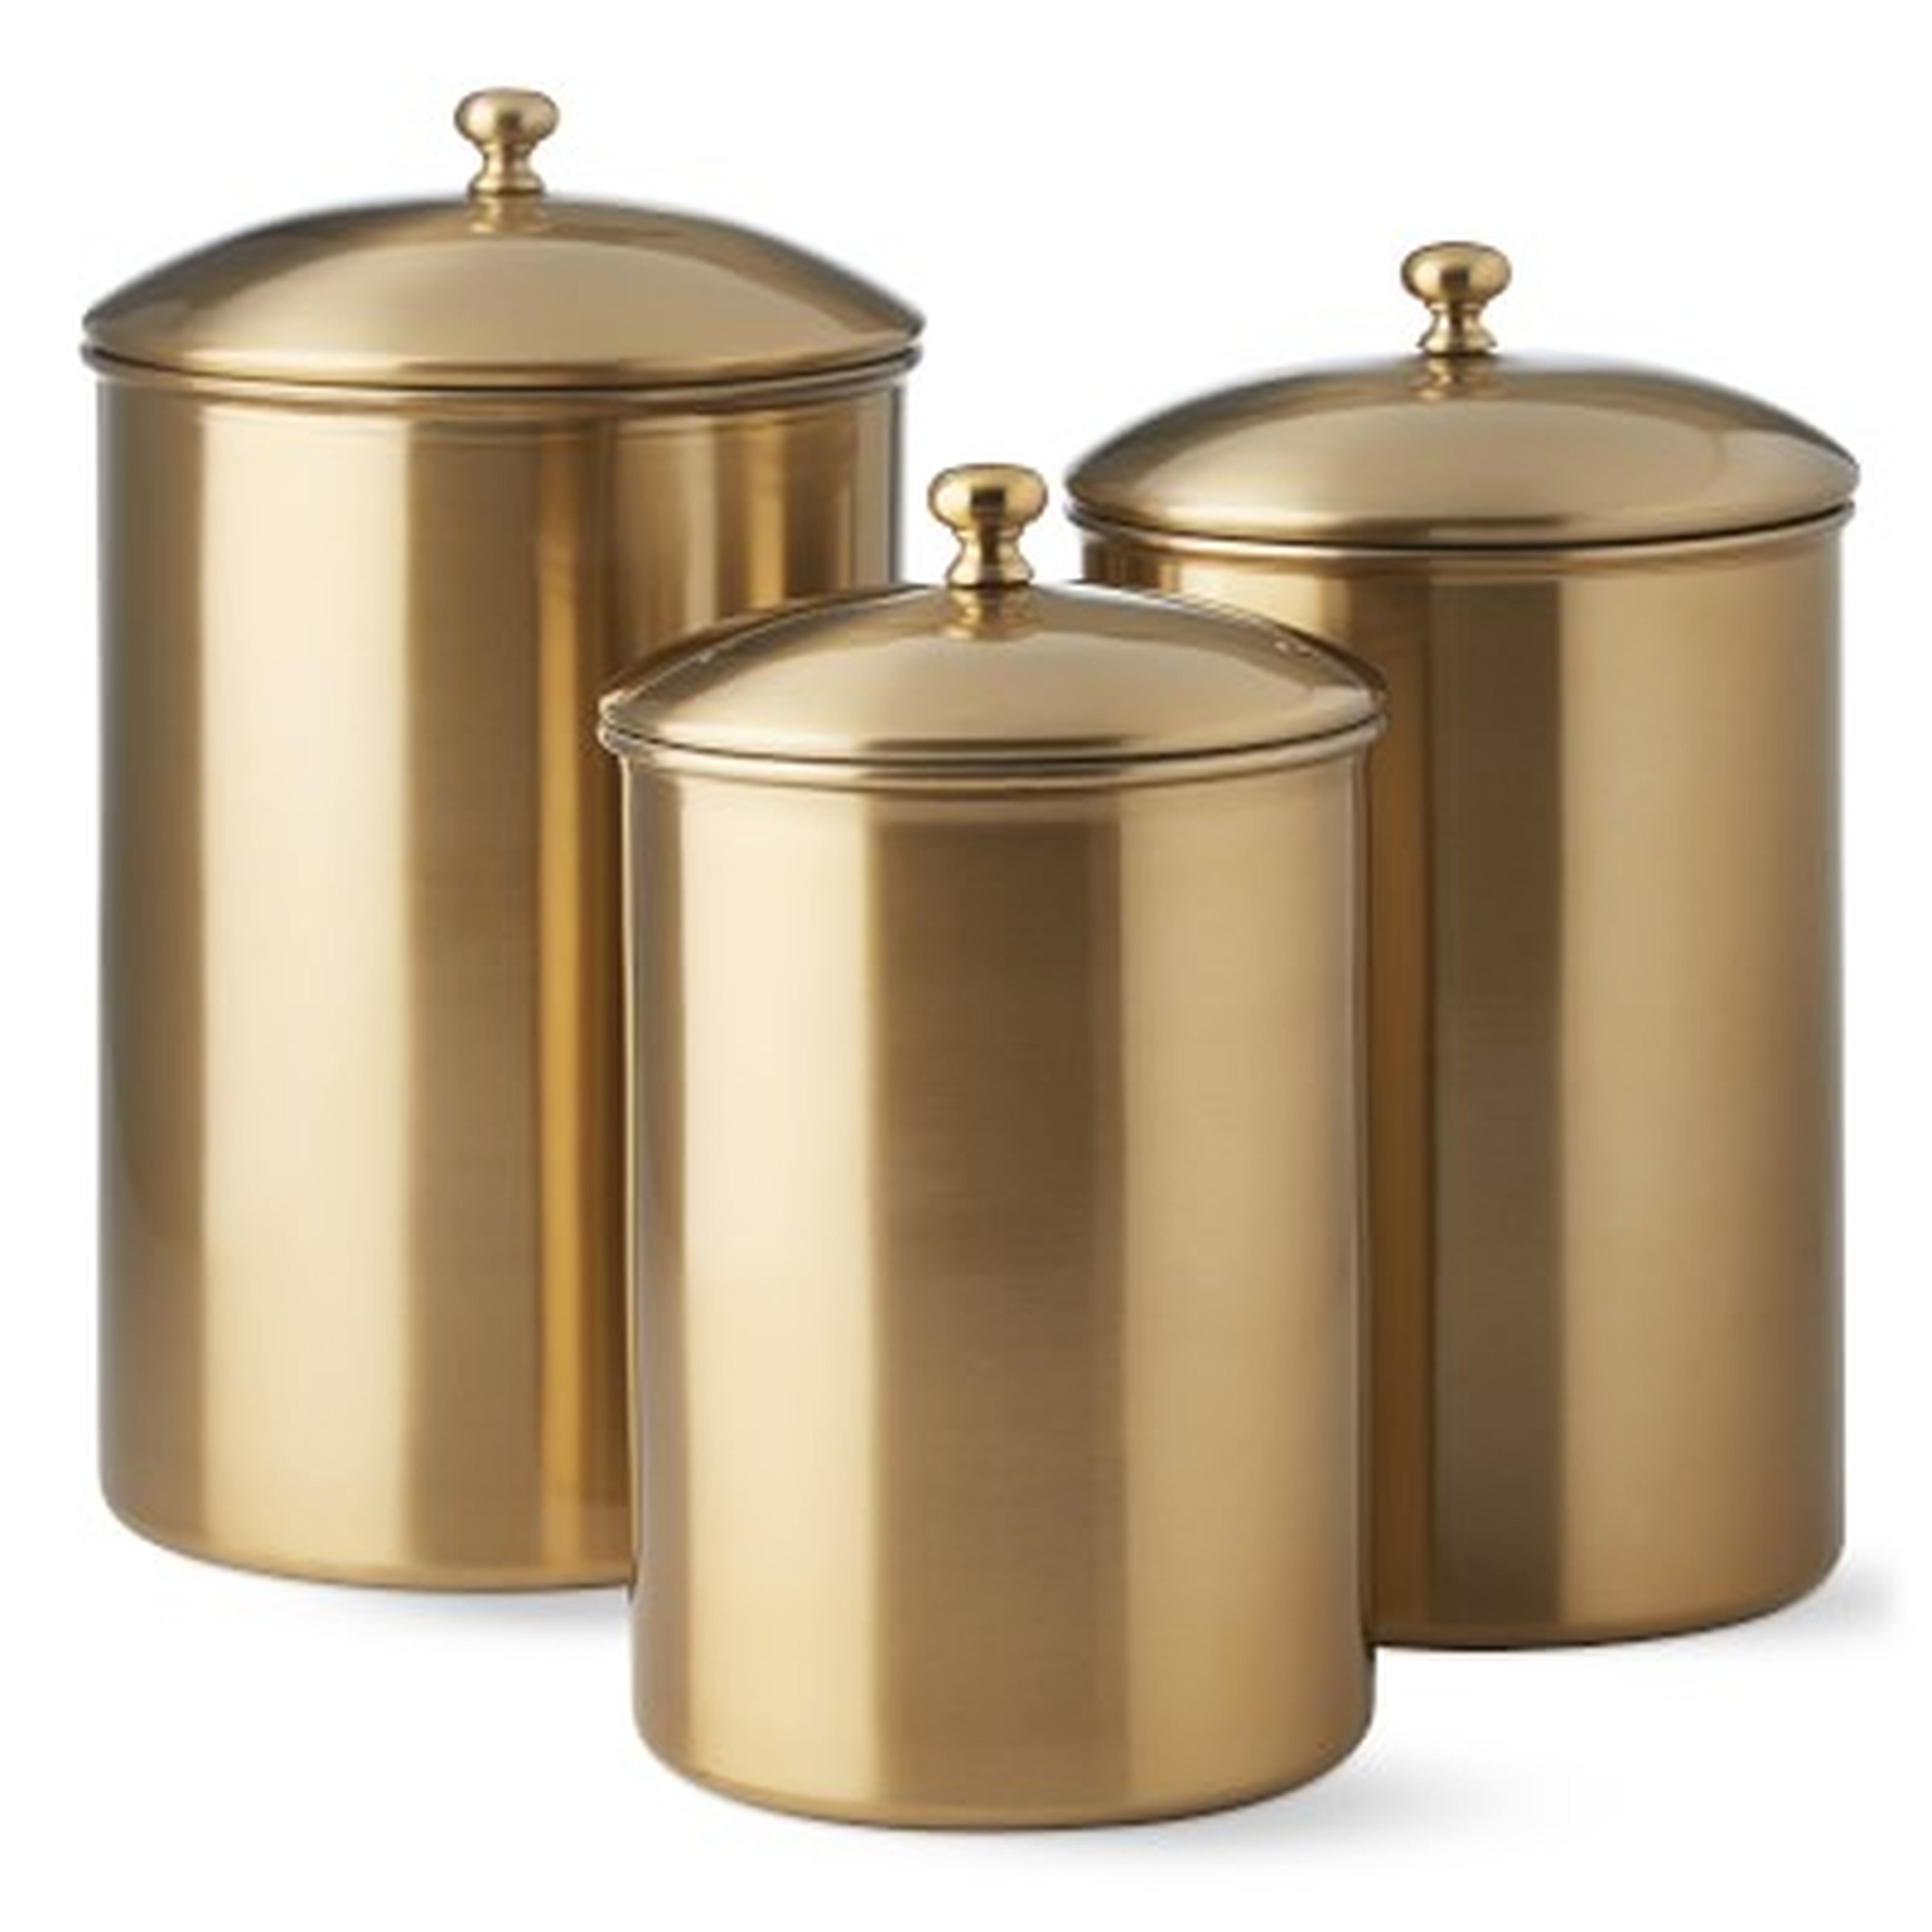 Gold Canisters, Set of 3 - Williams Sonoma